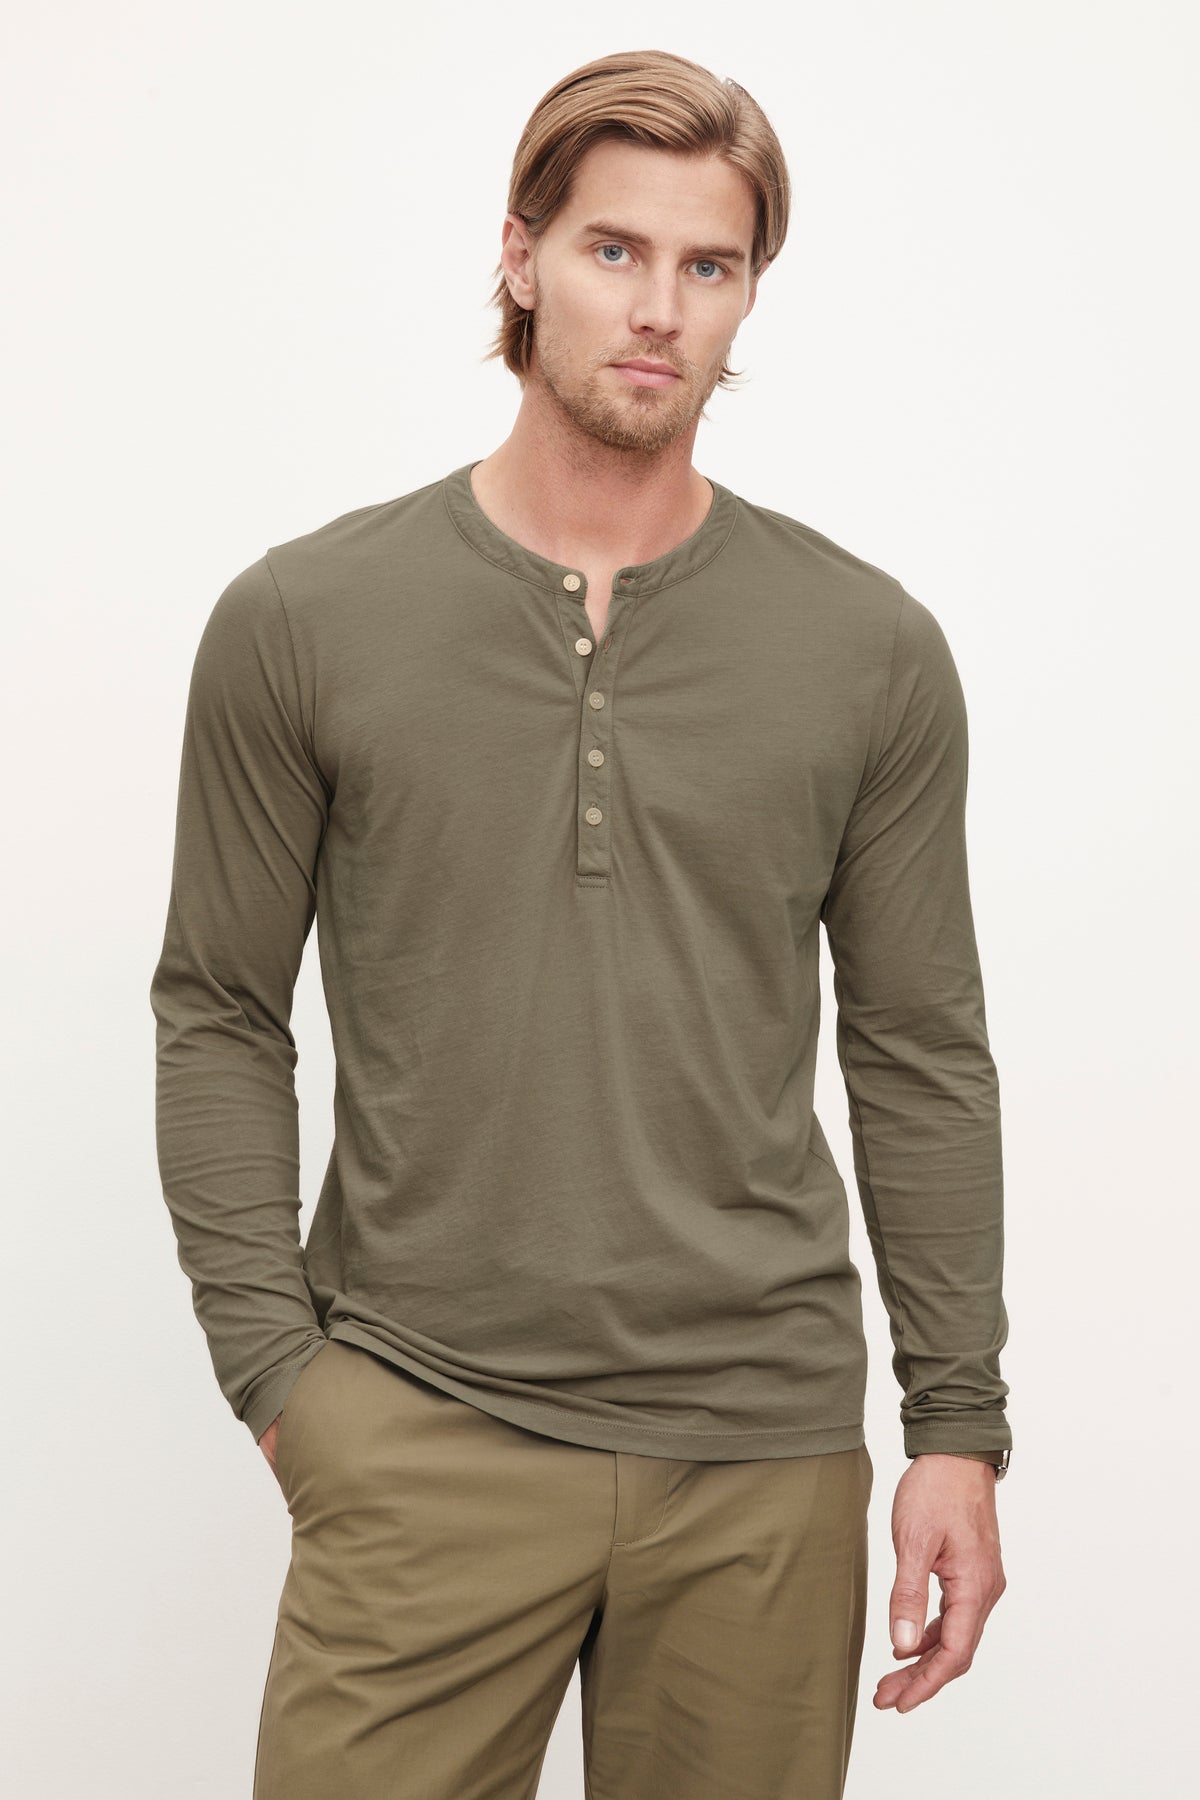 A man with blond hair and a beard, wearing a long-sleeve, olive green ALVARO HENLEY from Velvet by Graham & Spencer made from lightweight whisper knit fabric and khaki pants, stands with one hand in his pocket against a plain white background.-36009056370881